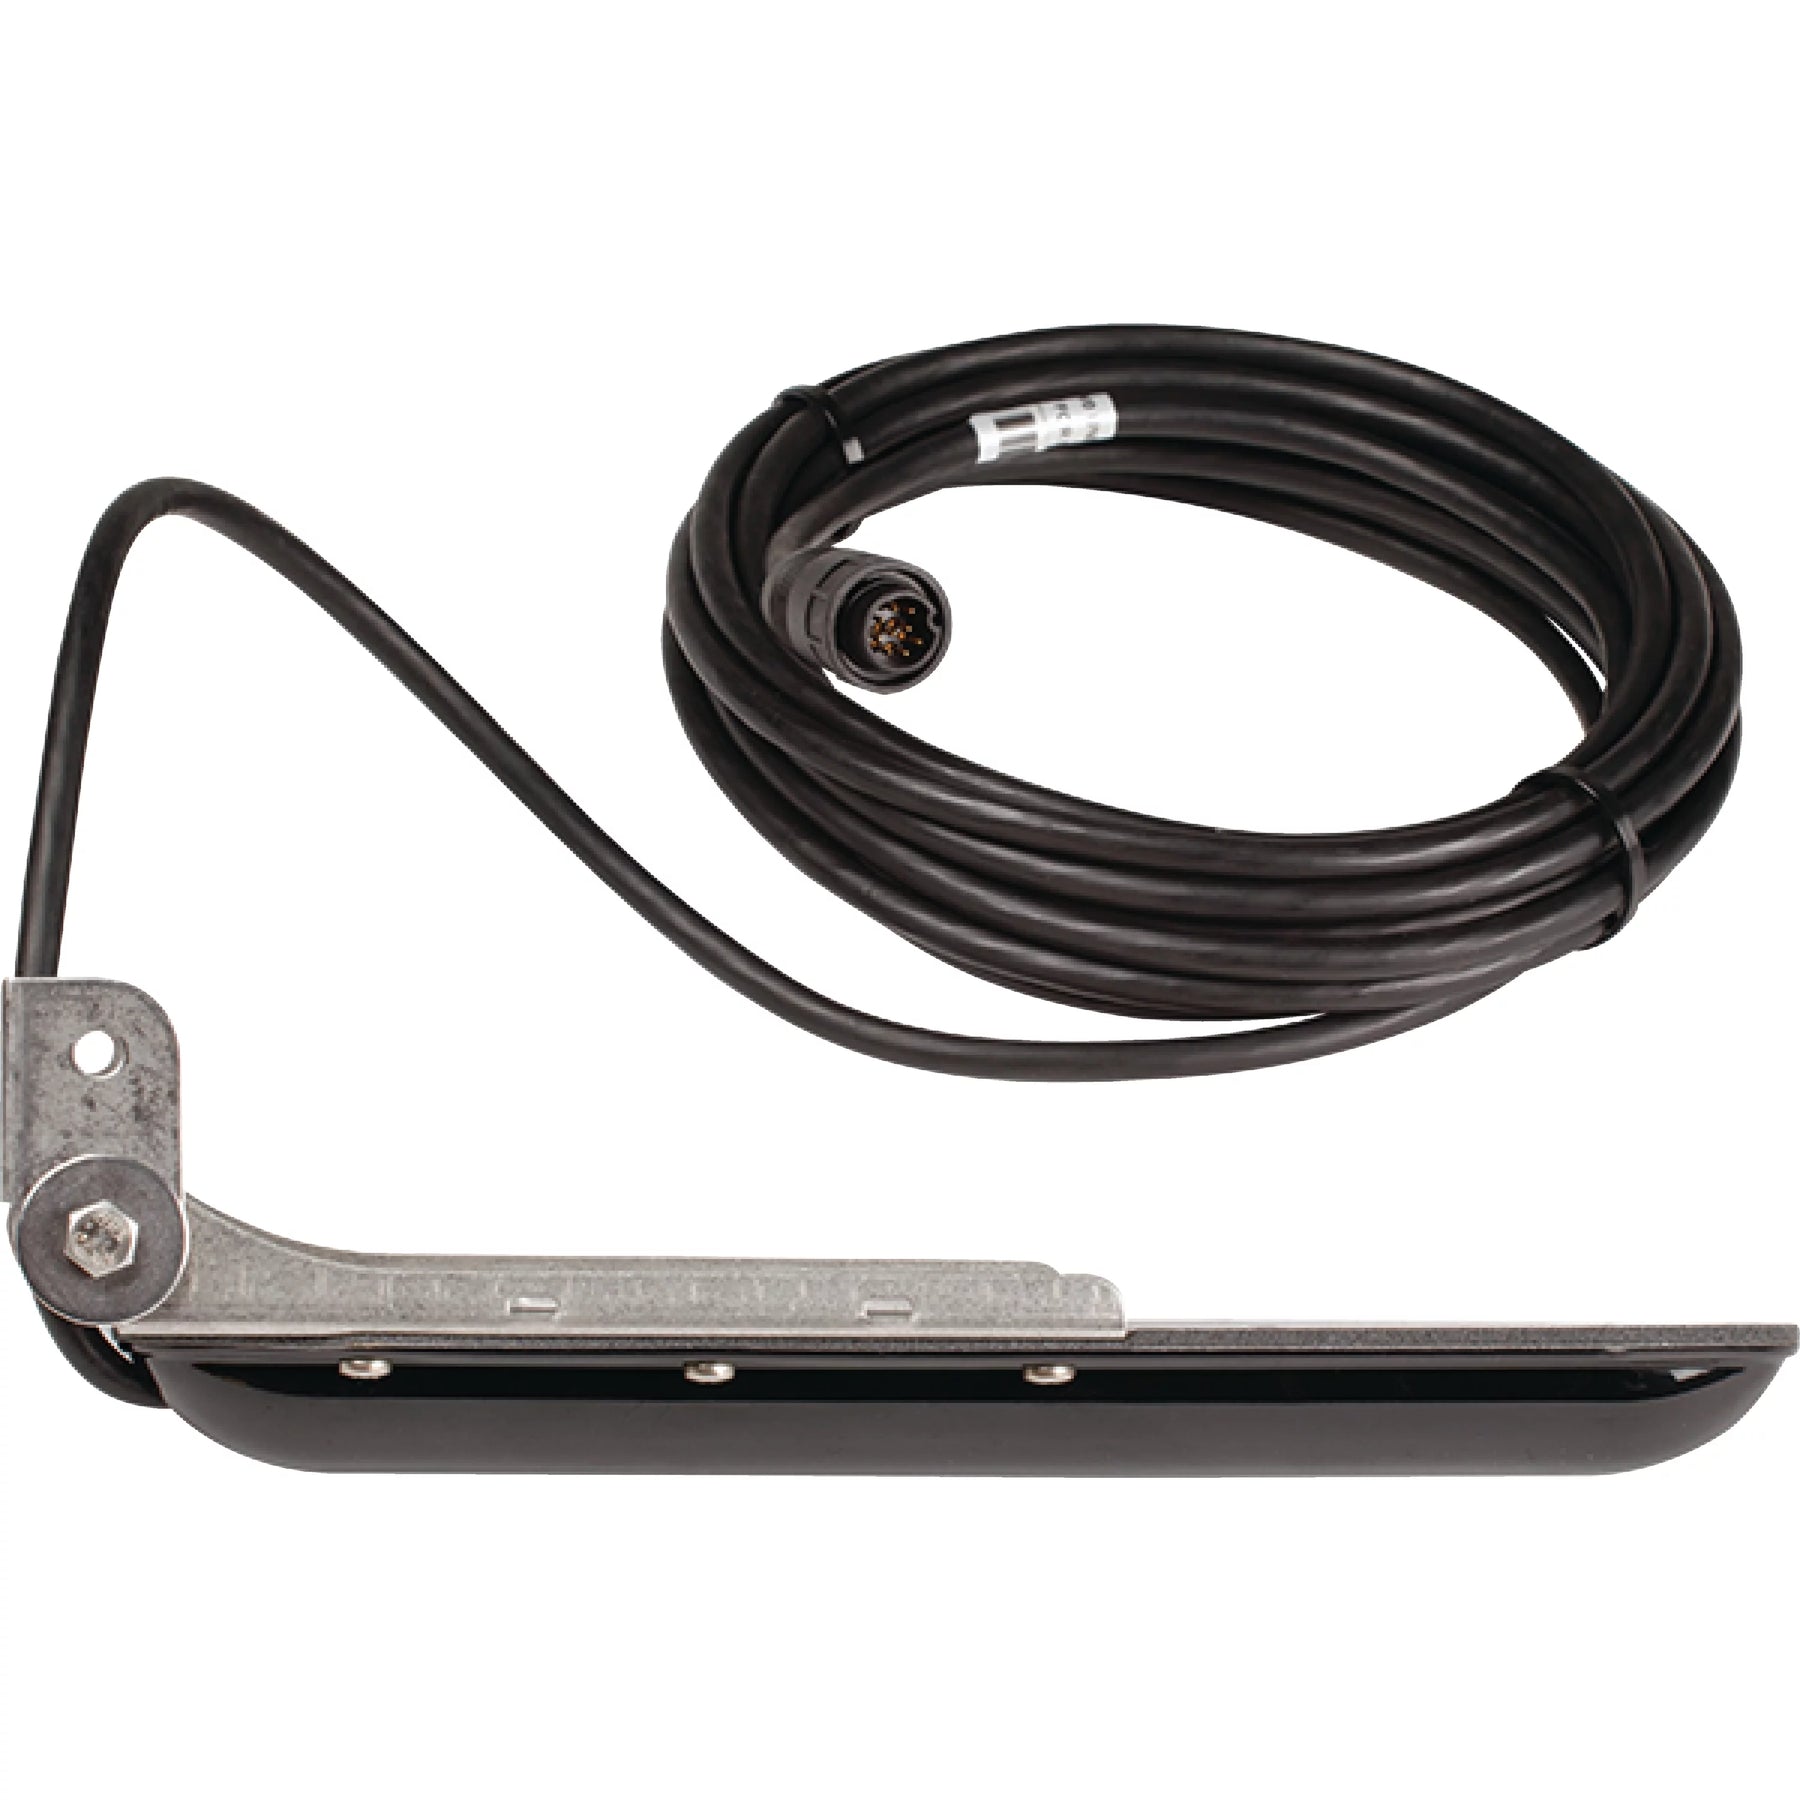 Lowrance 9-pin (black connector) Transducers